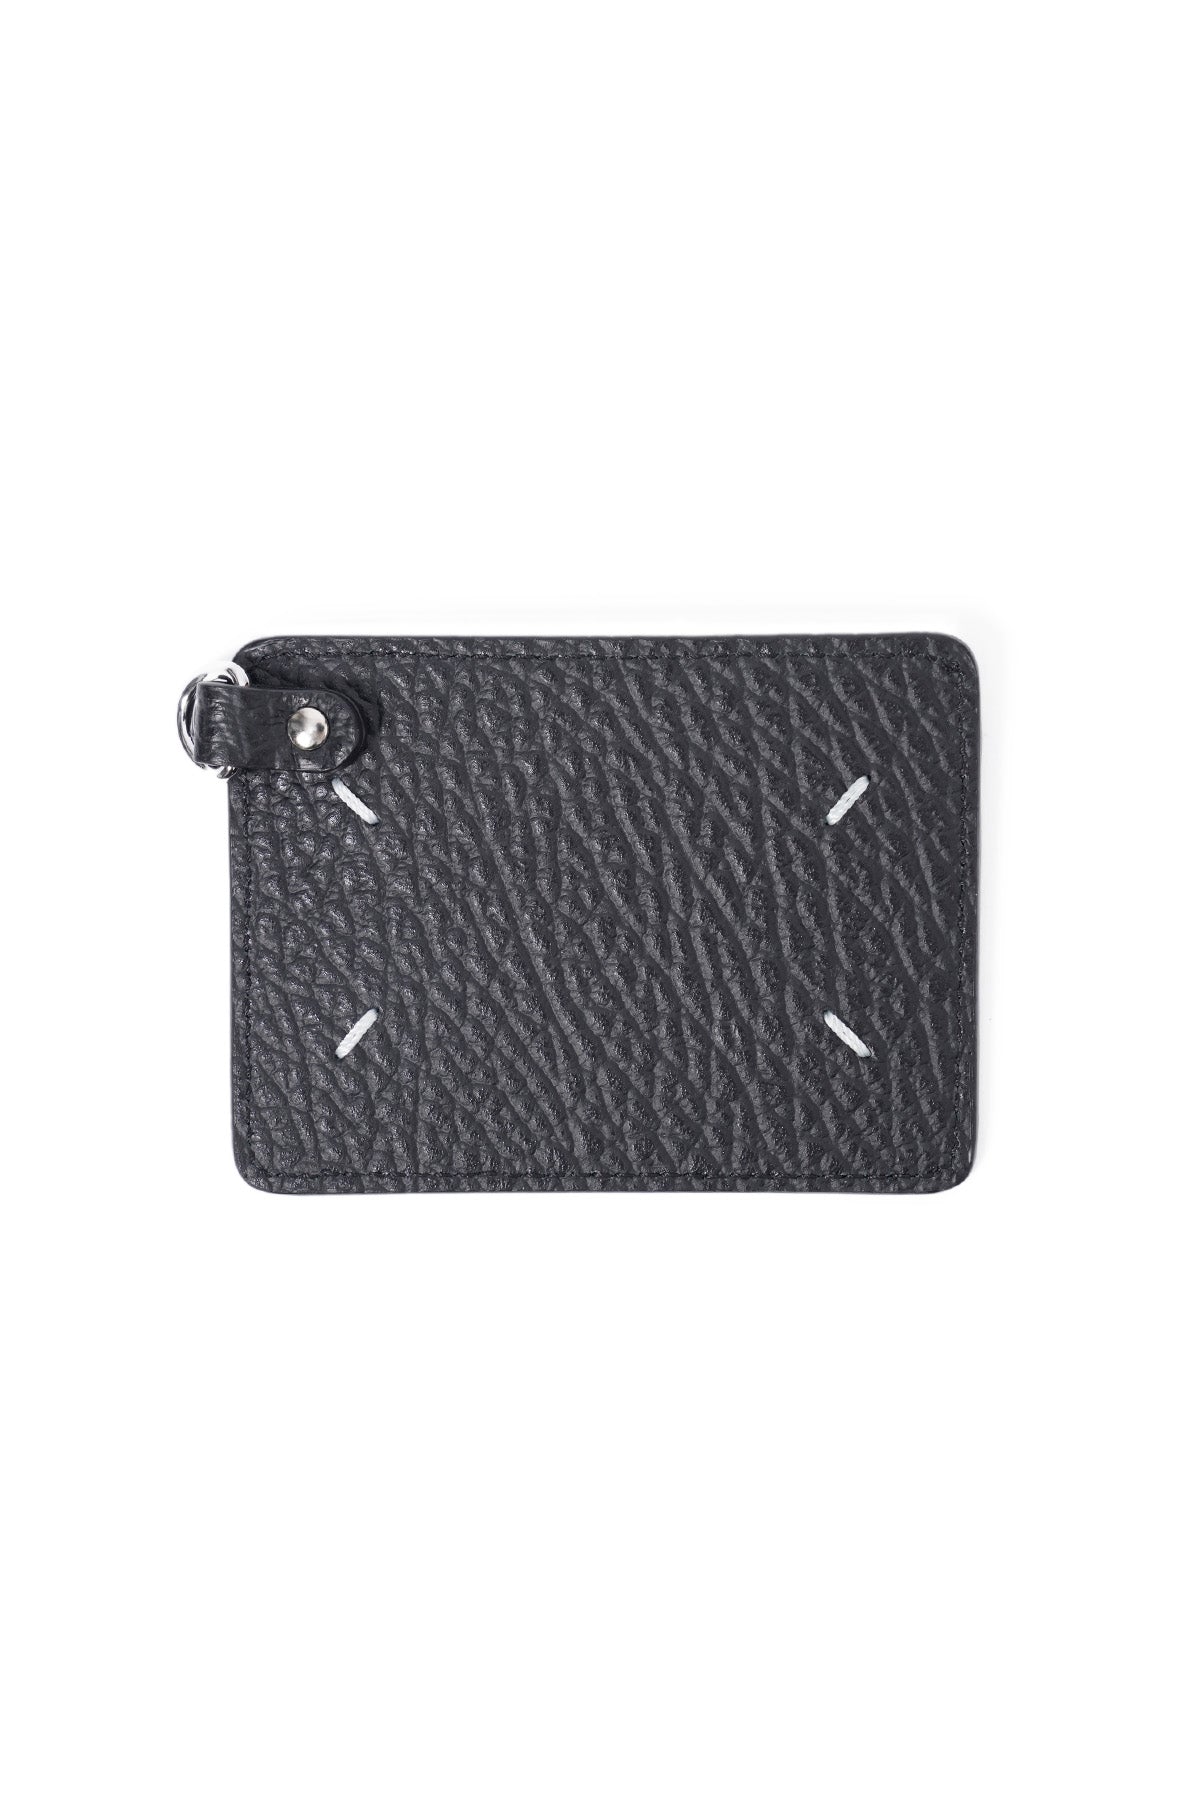 KEY AND CARD CASE